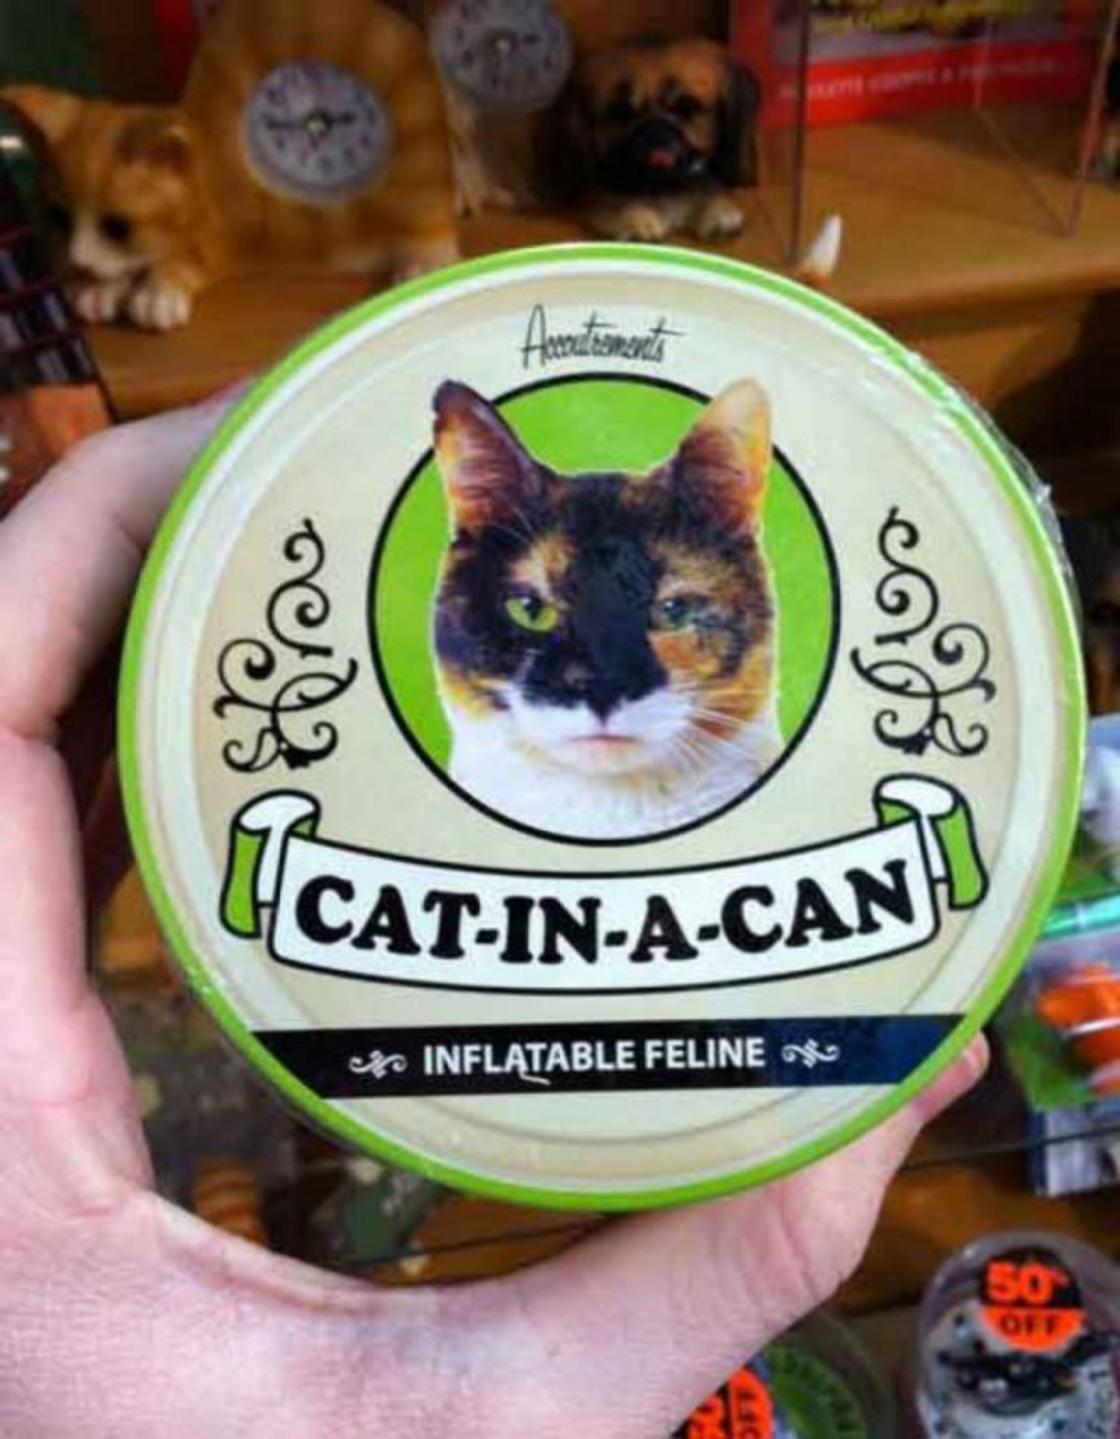 cat in a can, inflatable feline